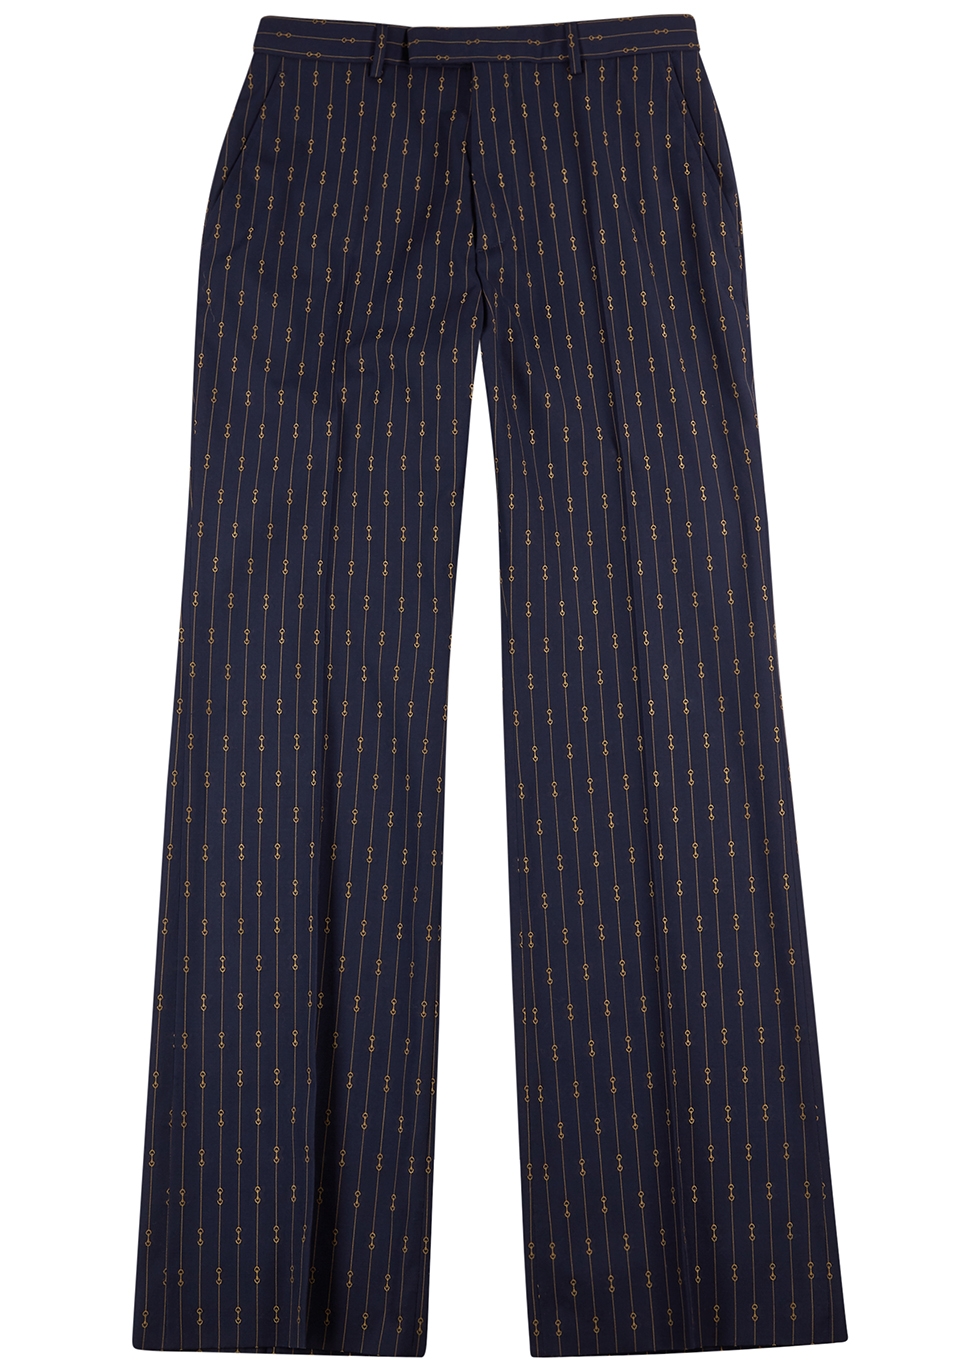 Limited Cut Jacquard Pants in Navy-